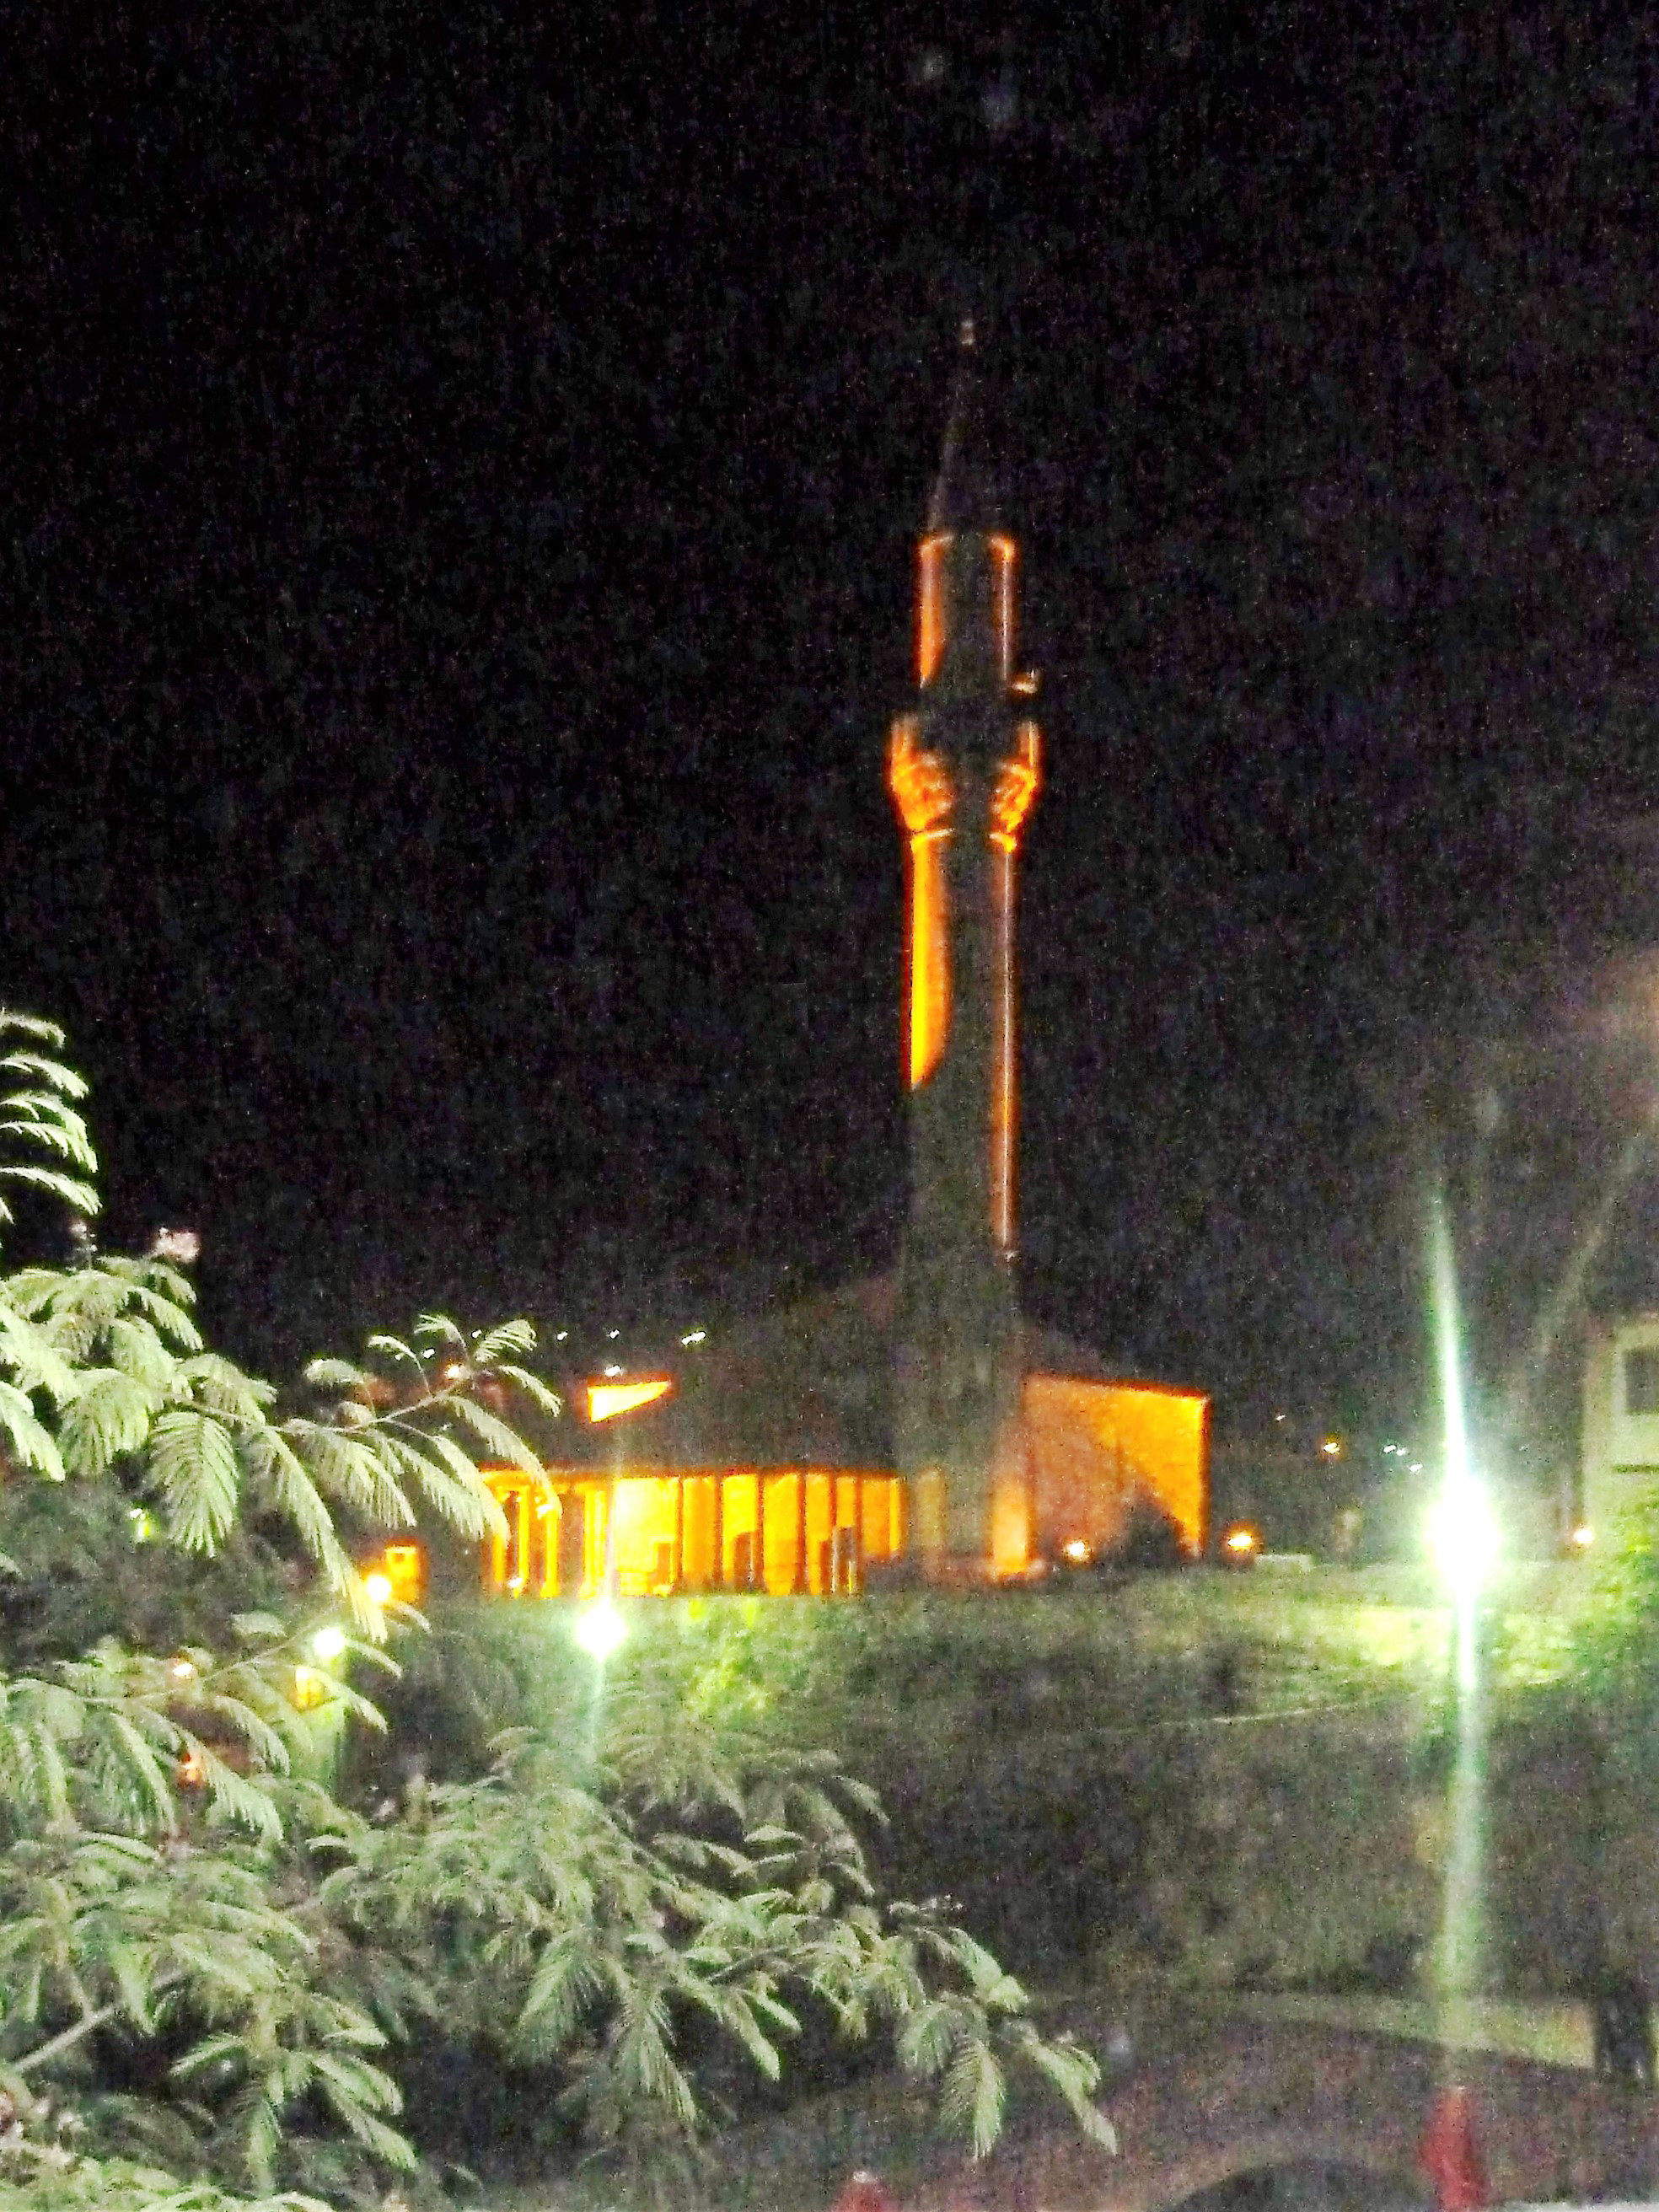 Mosque by night